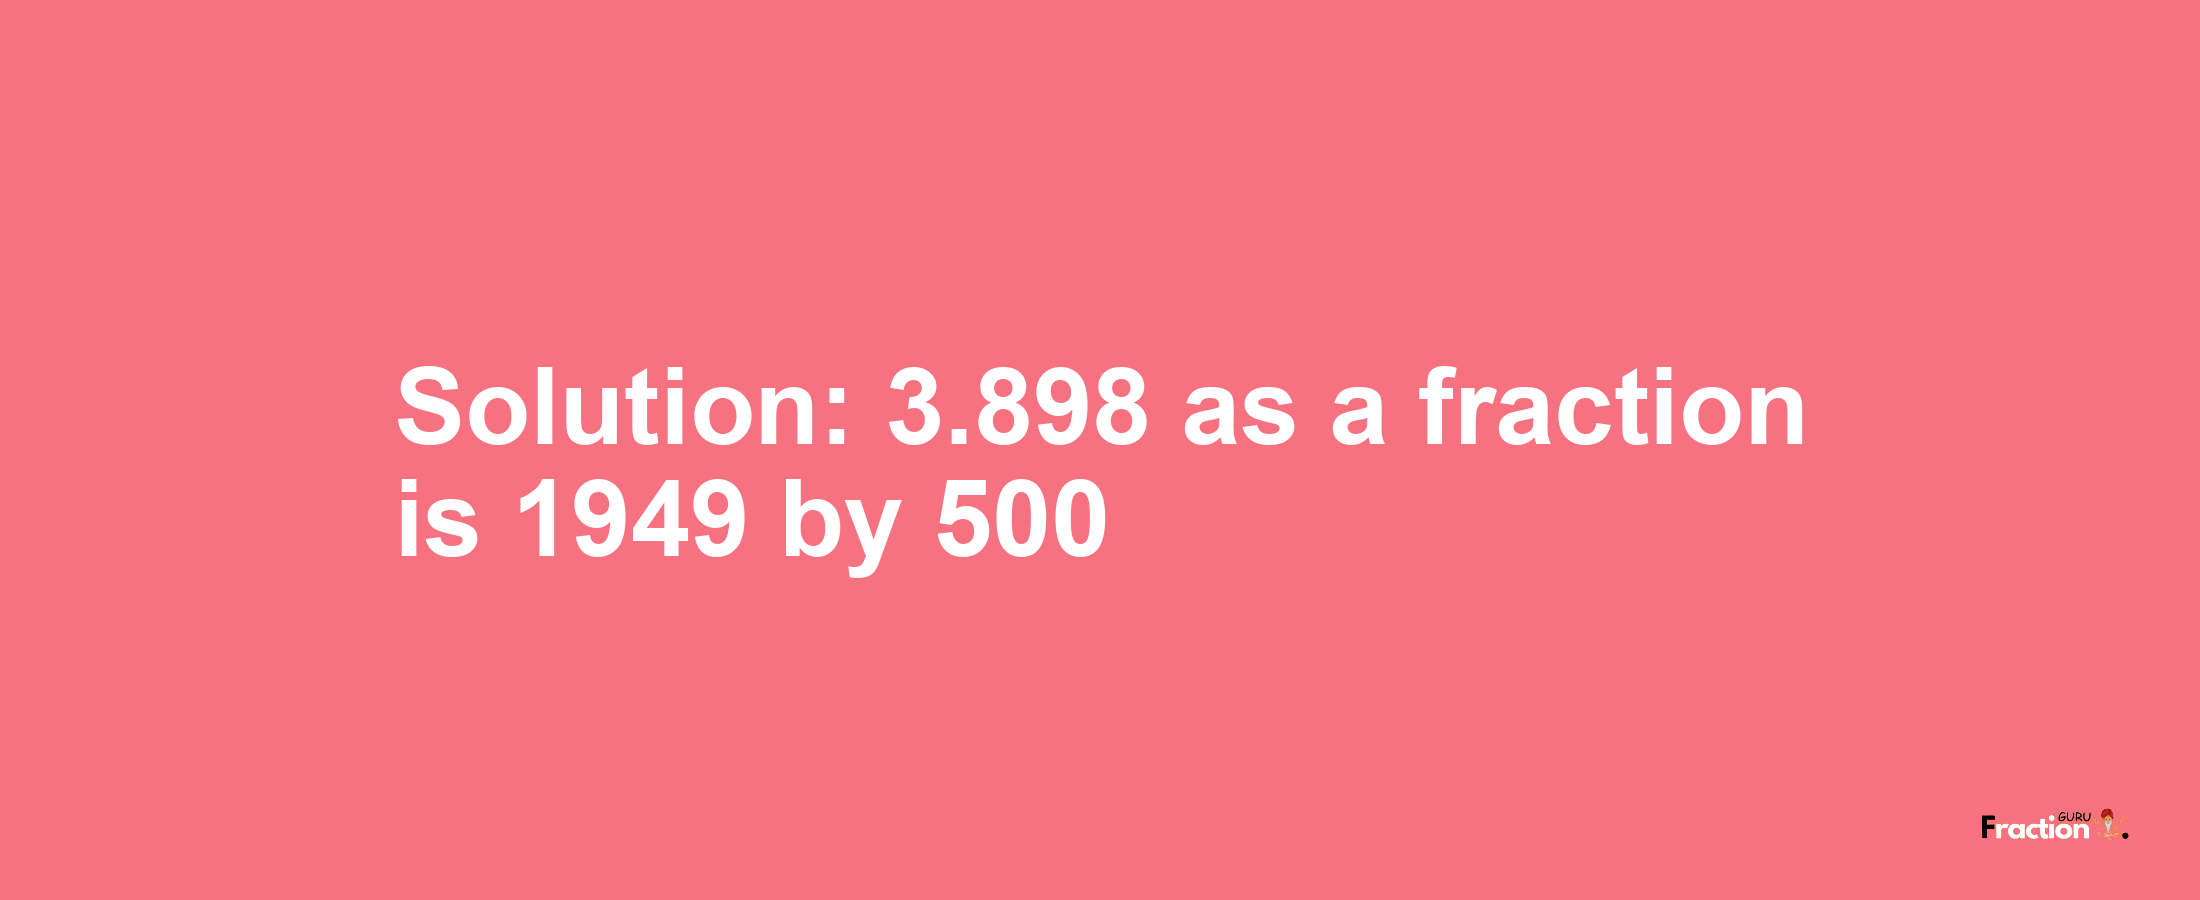 Solution:3.898 as a fraction is 1949/500